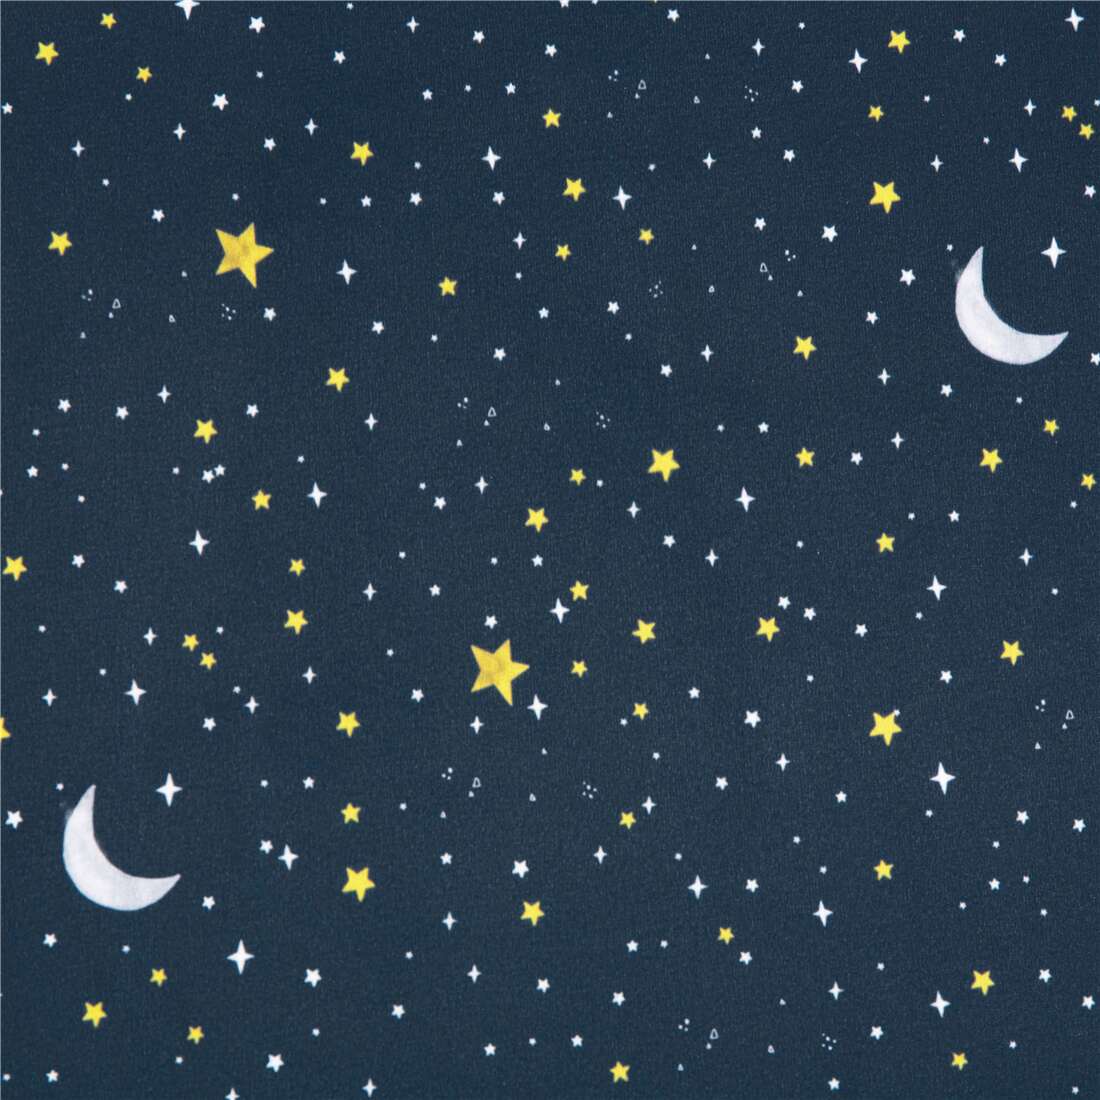 Dear Stella minky fabric navy with crescent moon stars extra wide - modeS4u